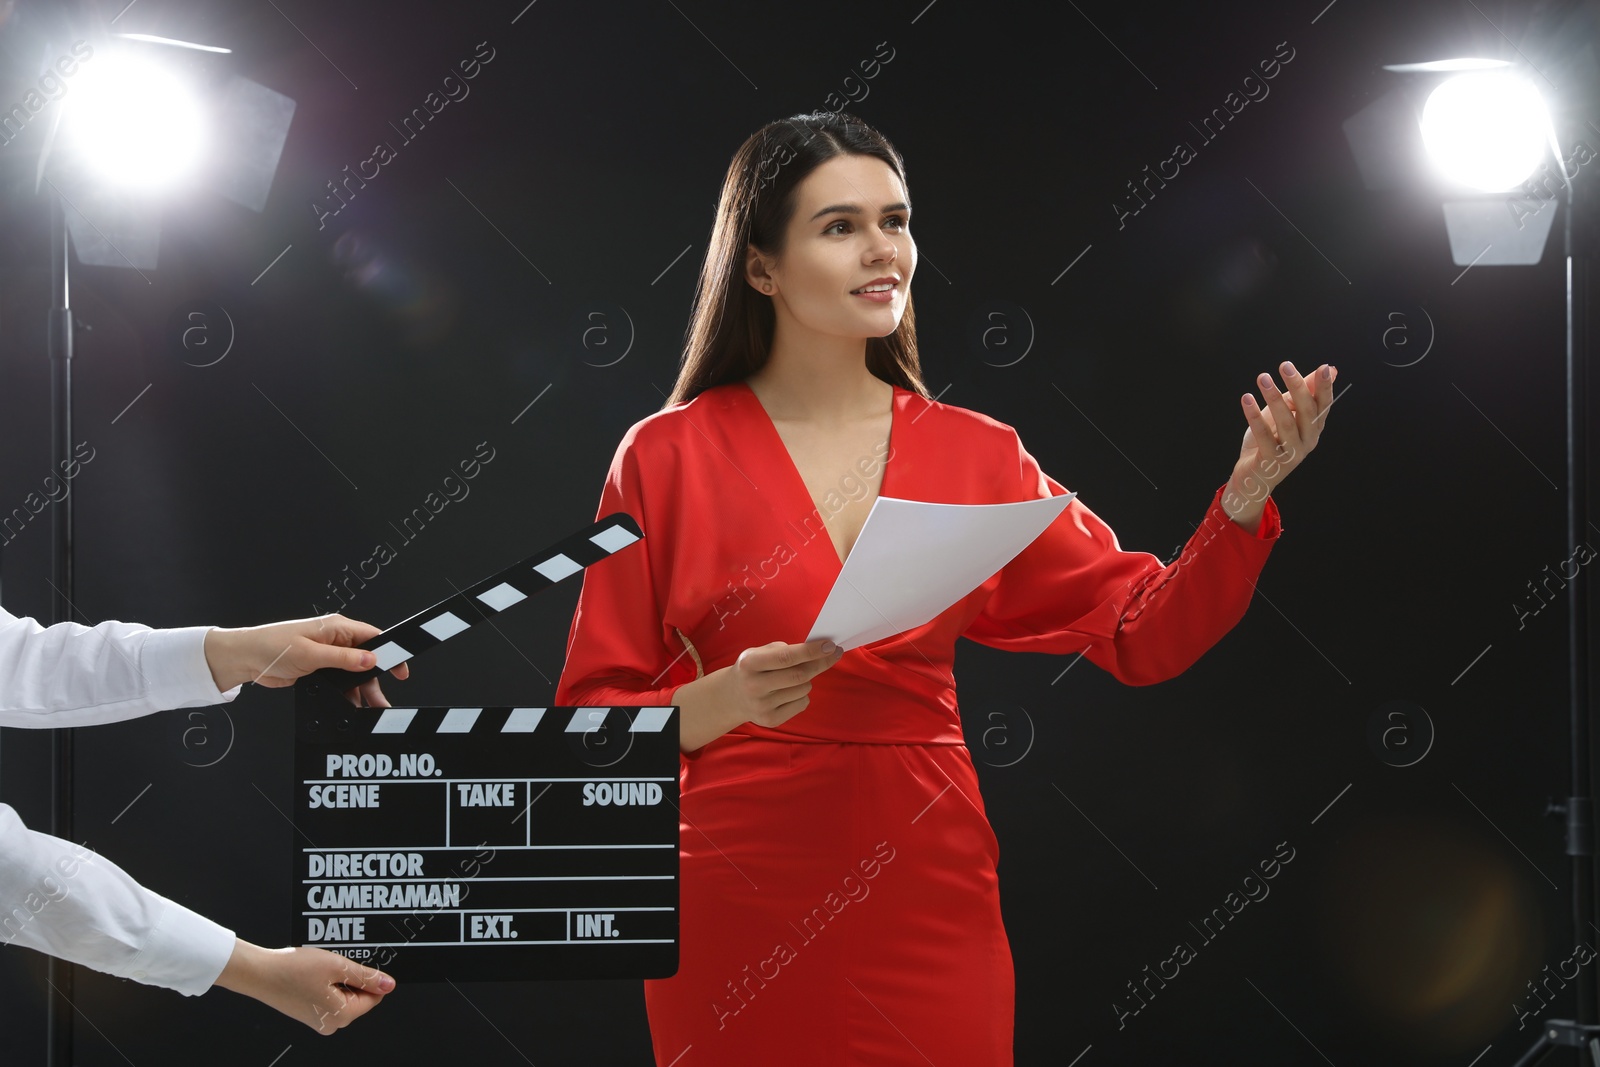 Photo of Emotional actress performing role while second assistant camera holding clapperboard on stage. Film industry